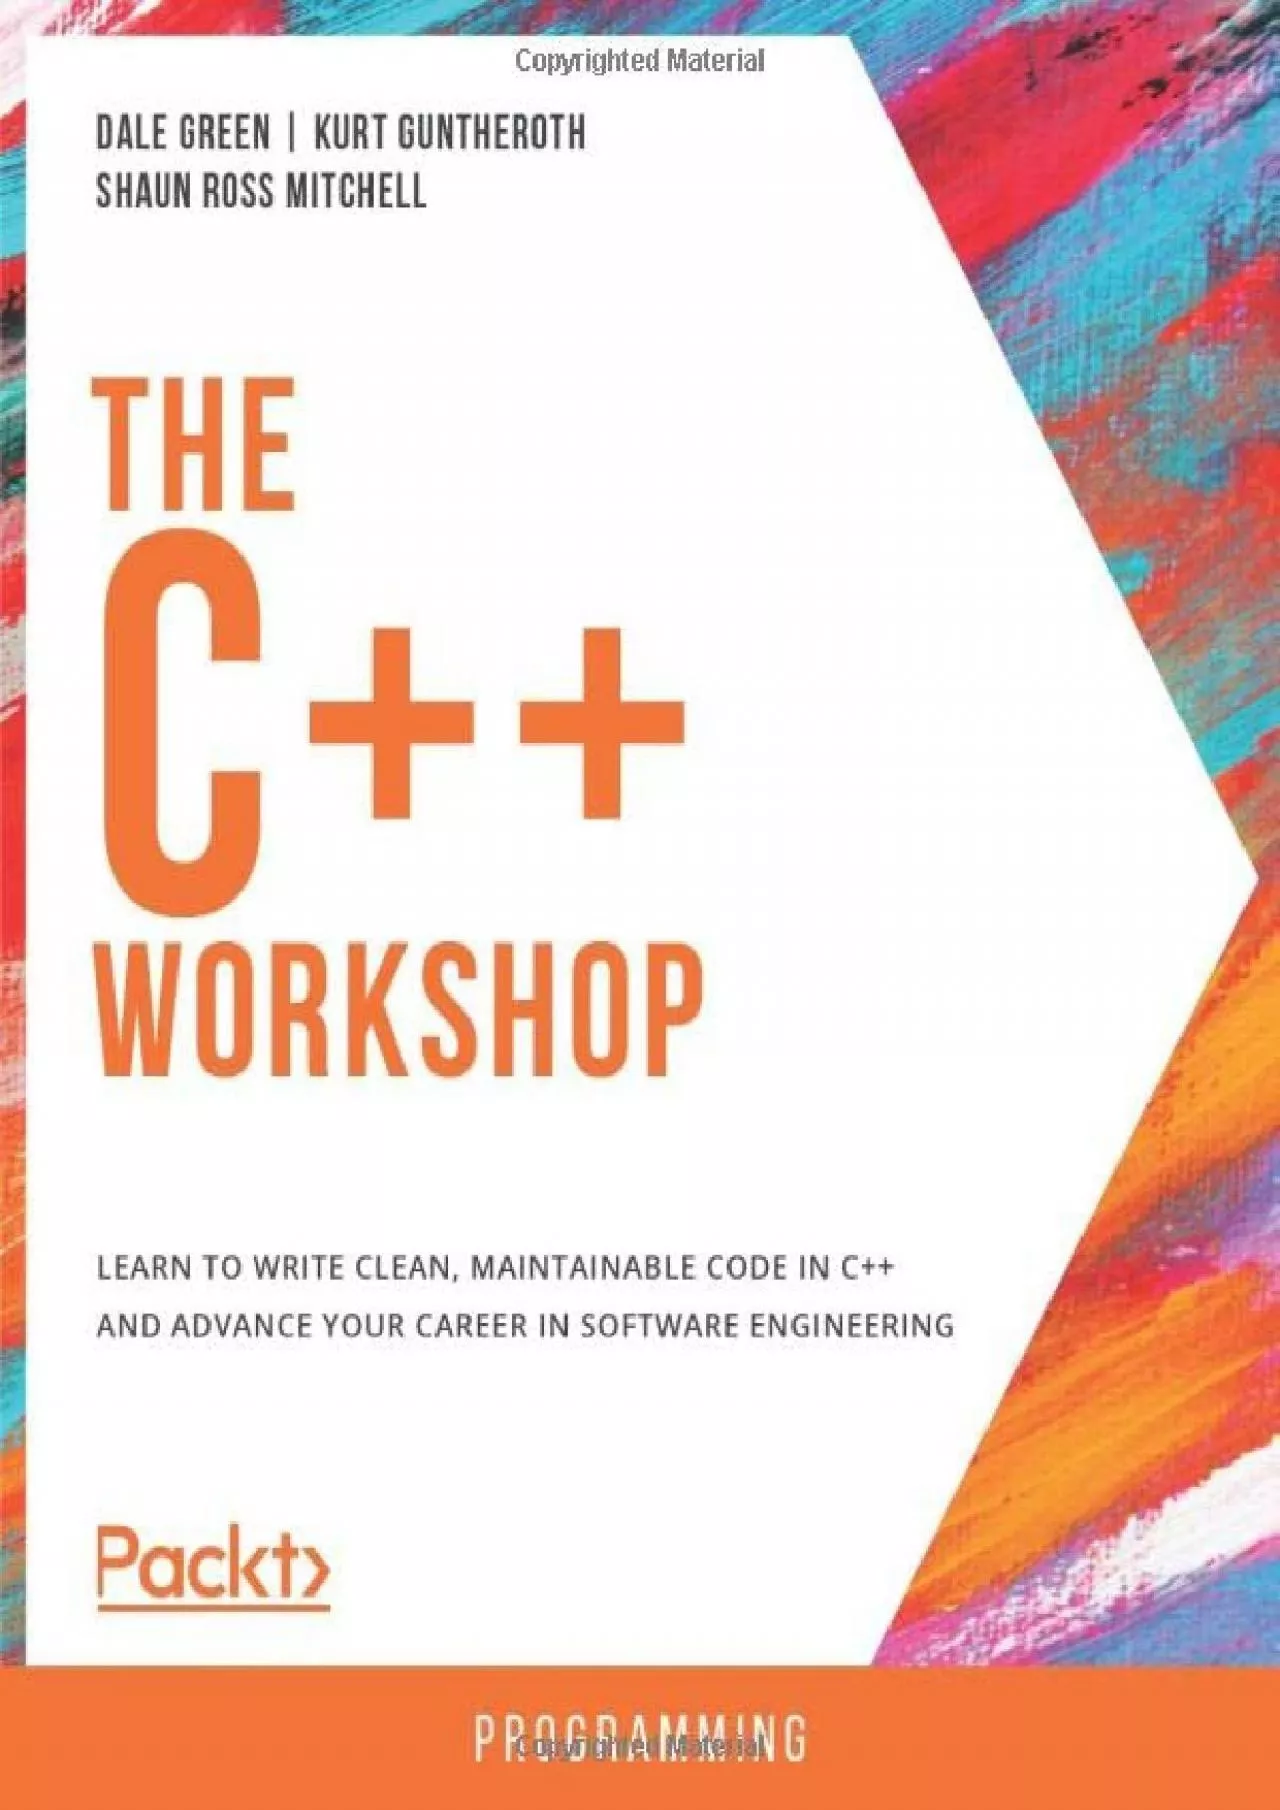 [READING BOOK]-The C++ Workshop: Learn to write clean, maintainable code in C++ and advance